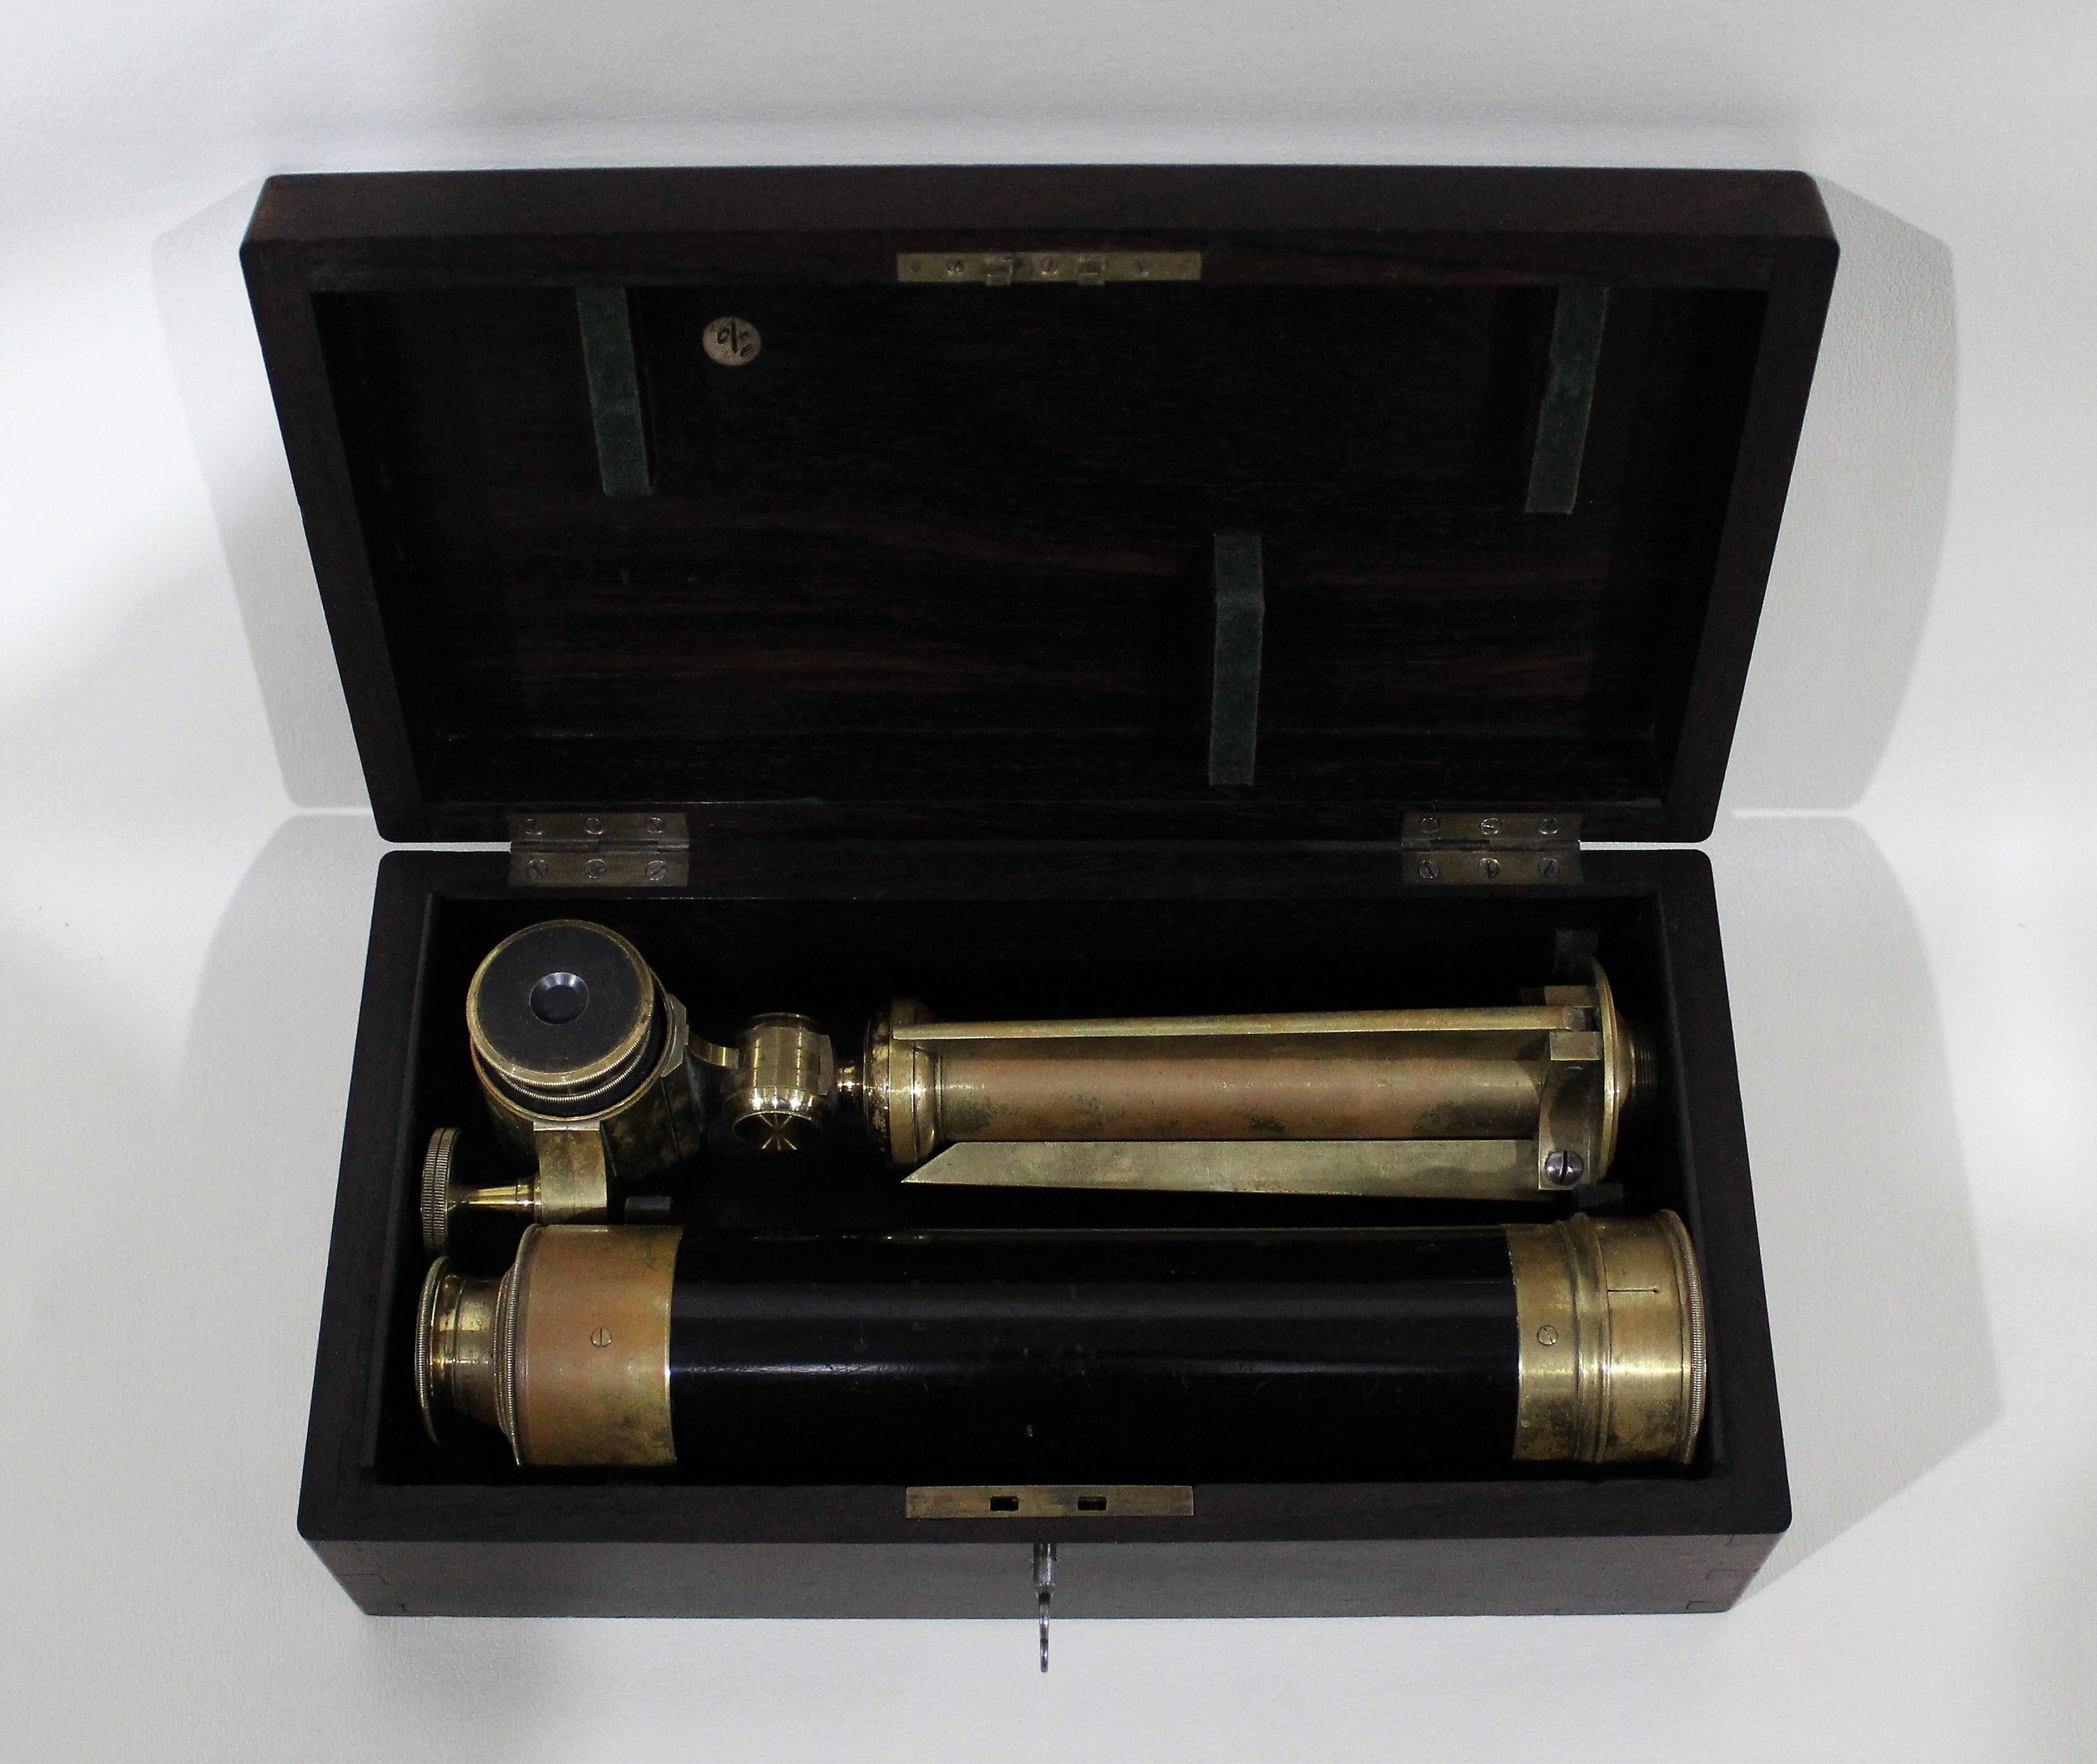 A four draw brass and mahogany telescope with mount/tripod feature and secondary eyepiece. In fitted lockable wood case with built in handle for portability. Sliding eyepiece cover is functioning and has a removable lens cap. No visible maker's